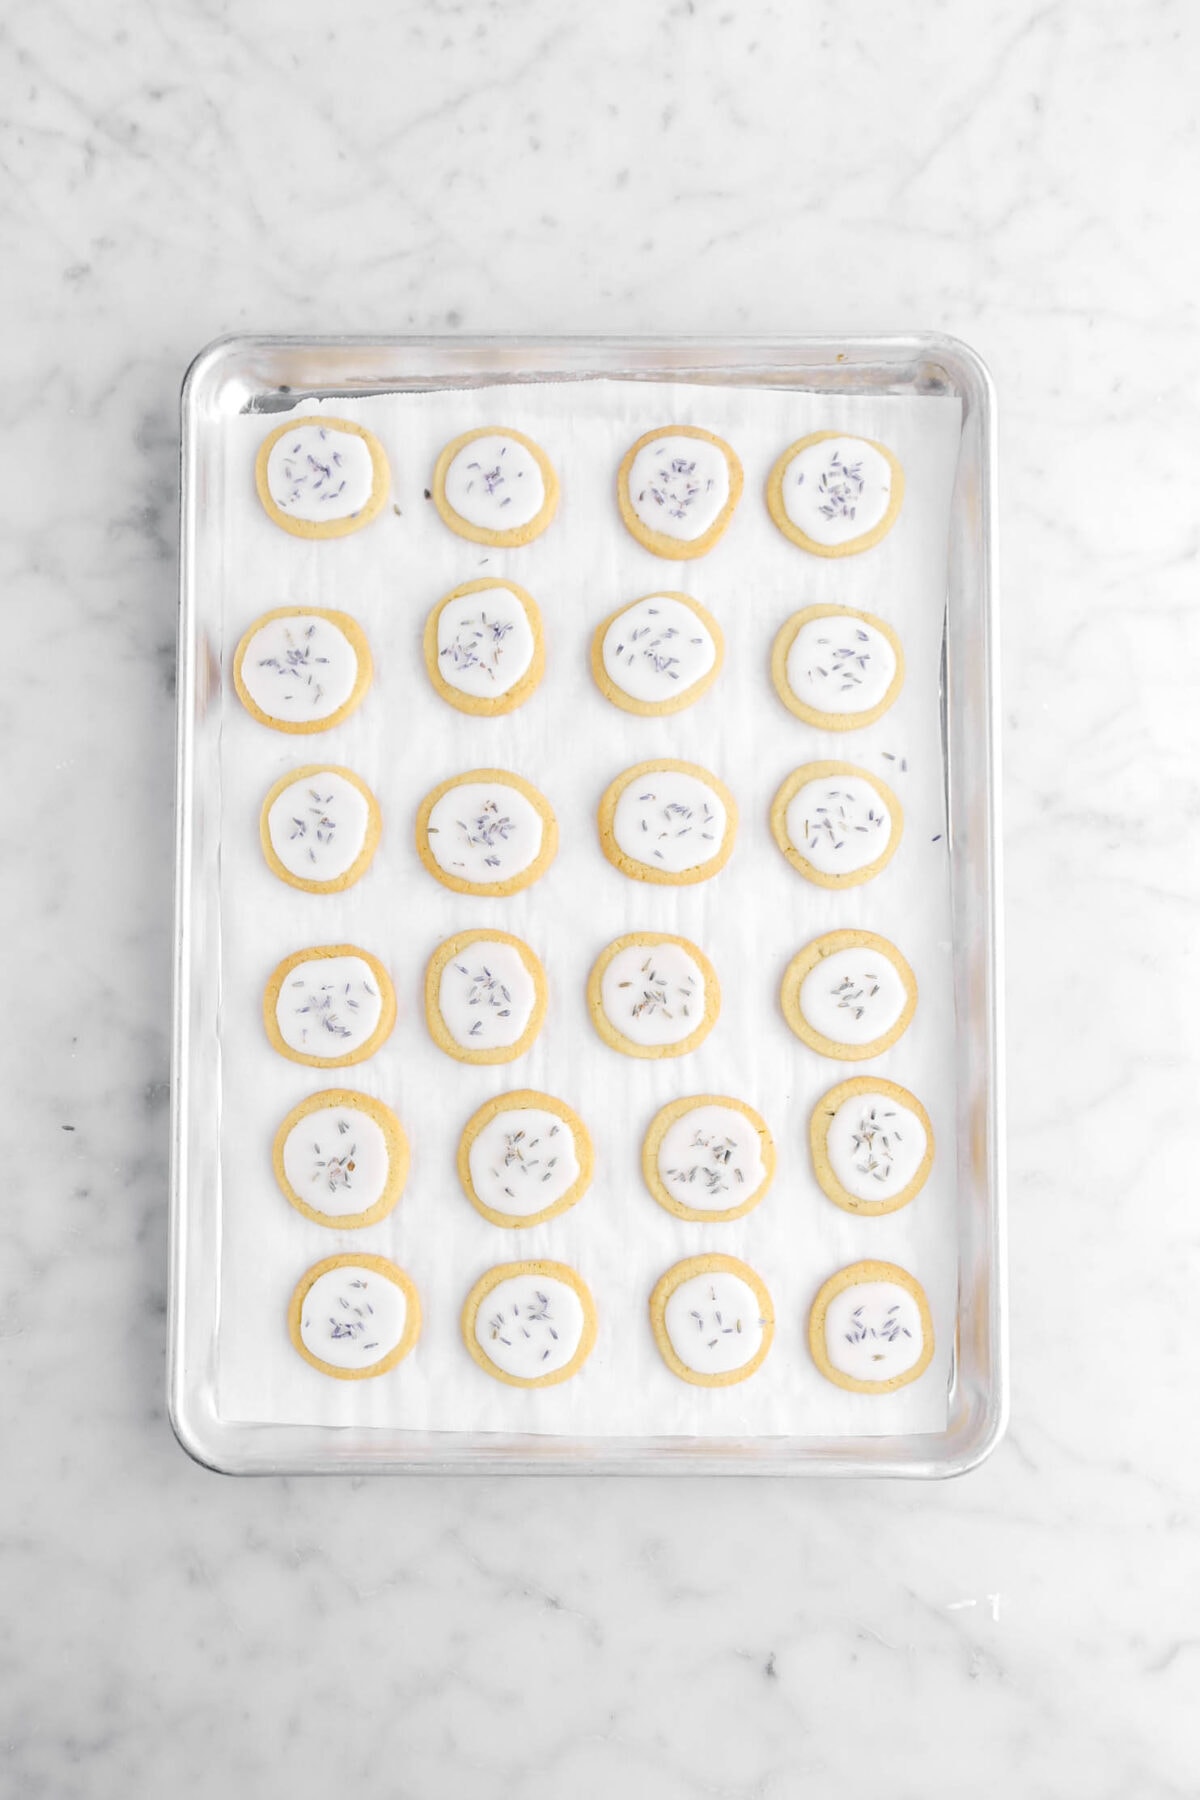 iced shortbread cookies with dried lavender on top on lined sheet pan.